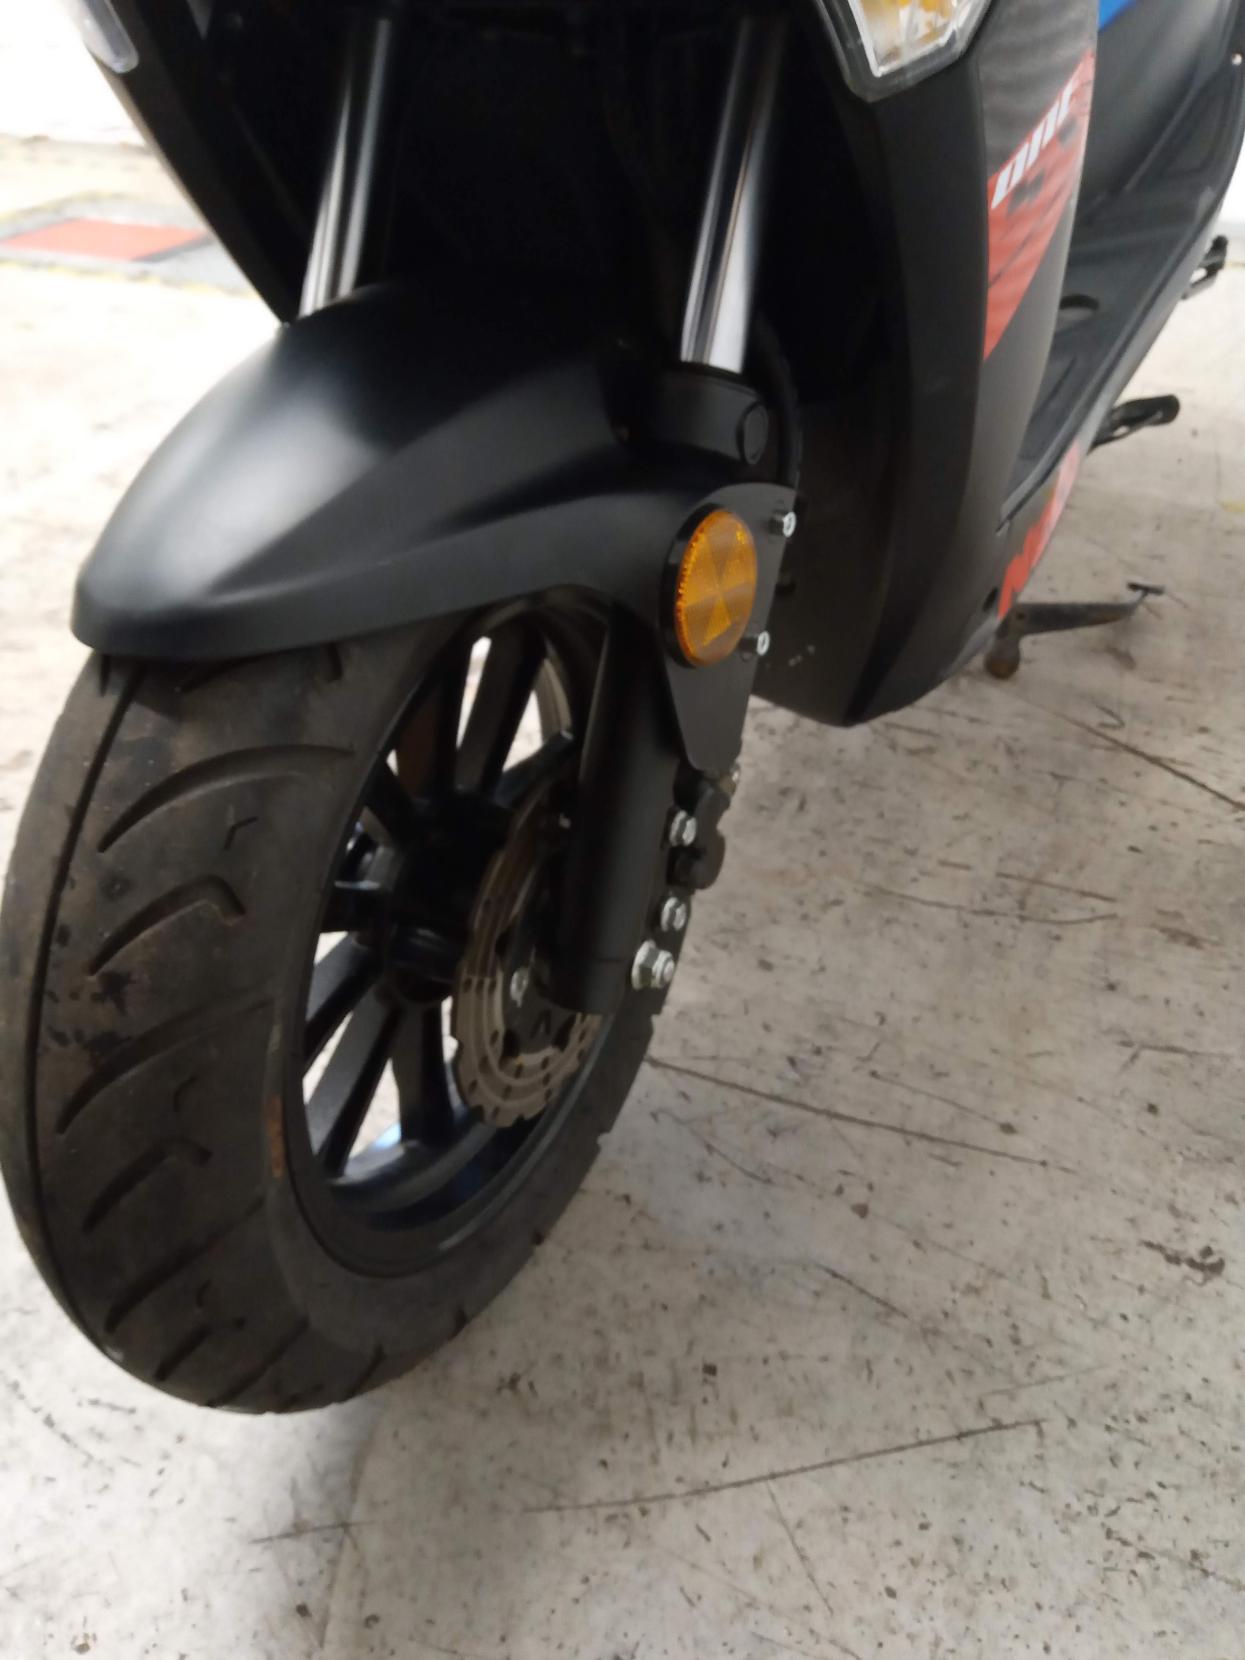 Neco One 50 50 12in SX Moped (2013 - )